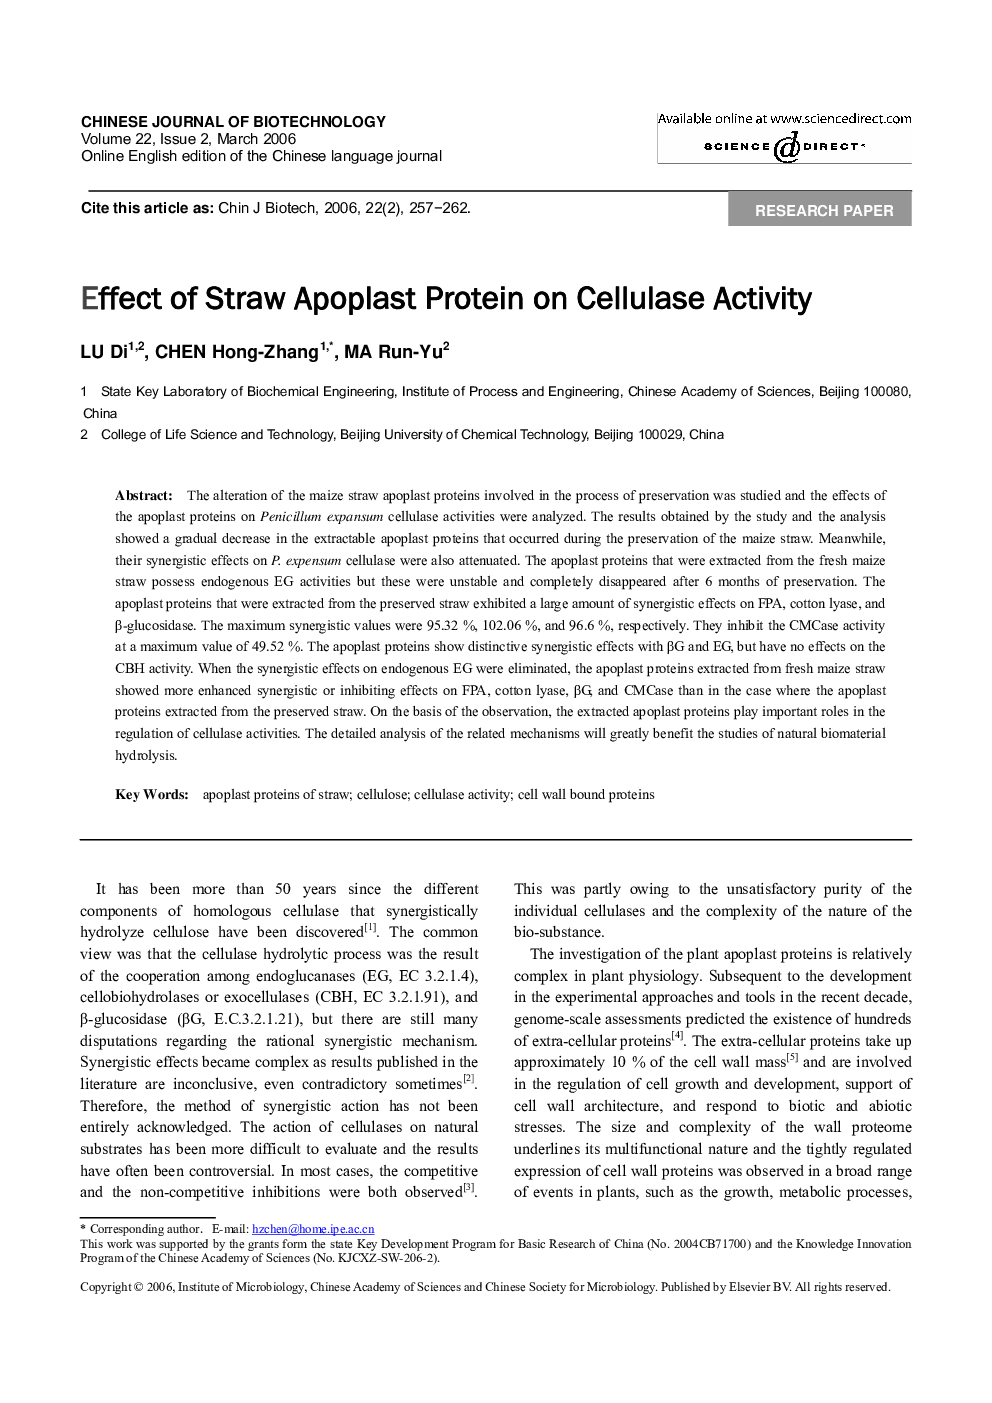 Effect of Straw Apoplast Protein on Cellulase Activity